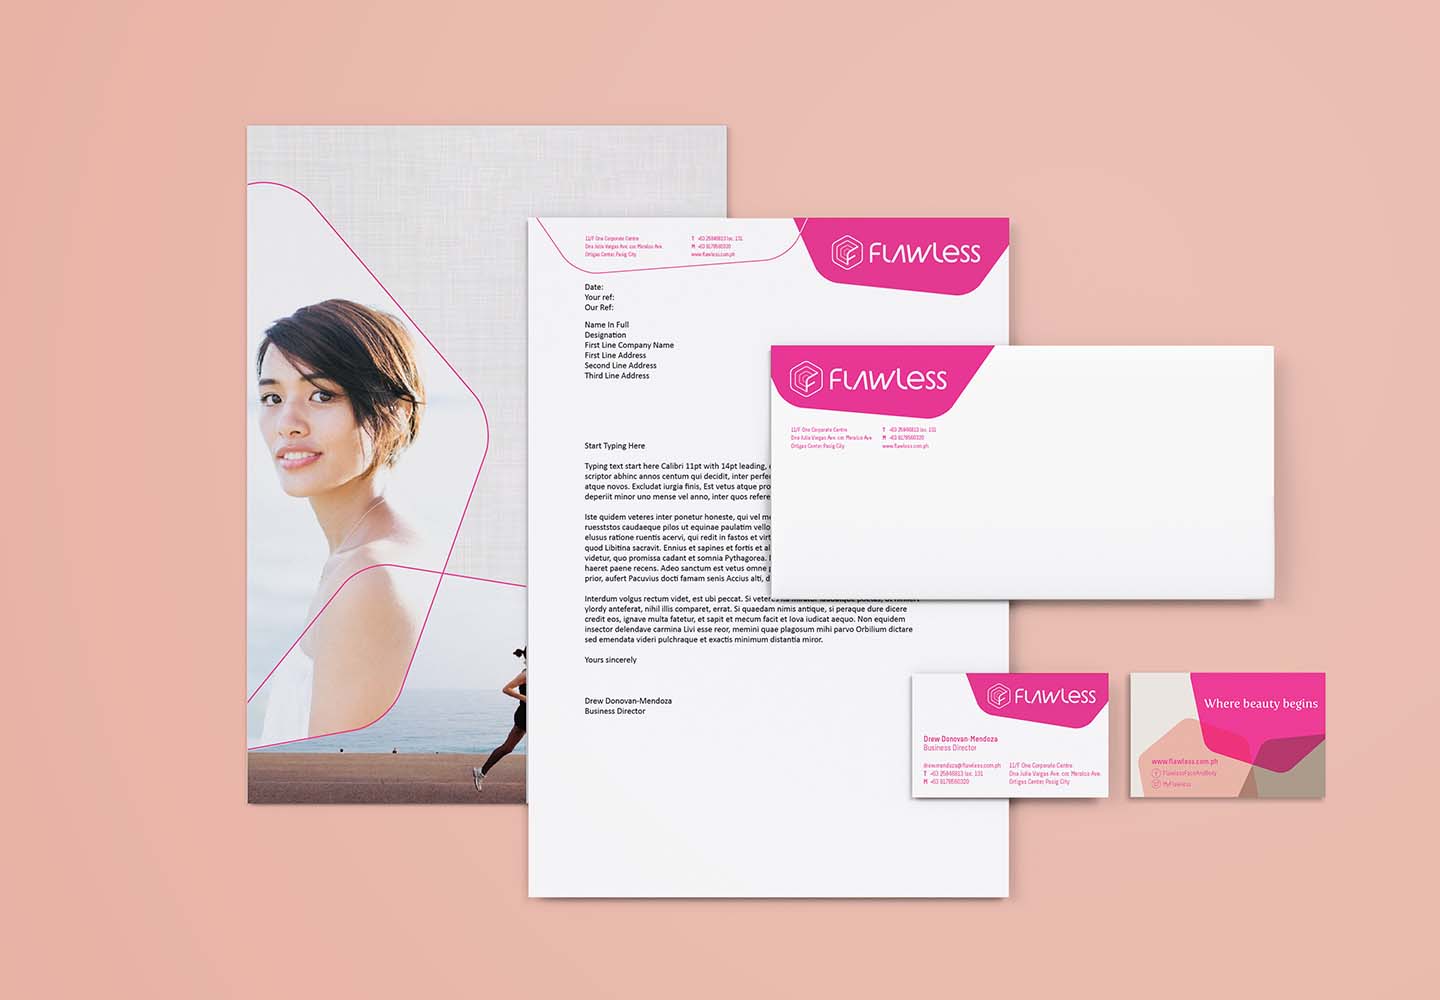 Brand Consultancy in Lifestyle Industry. Corporate Identity for Flawless.